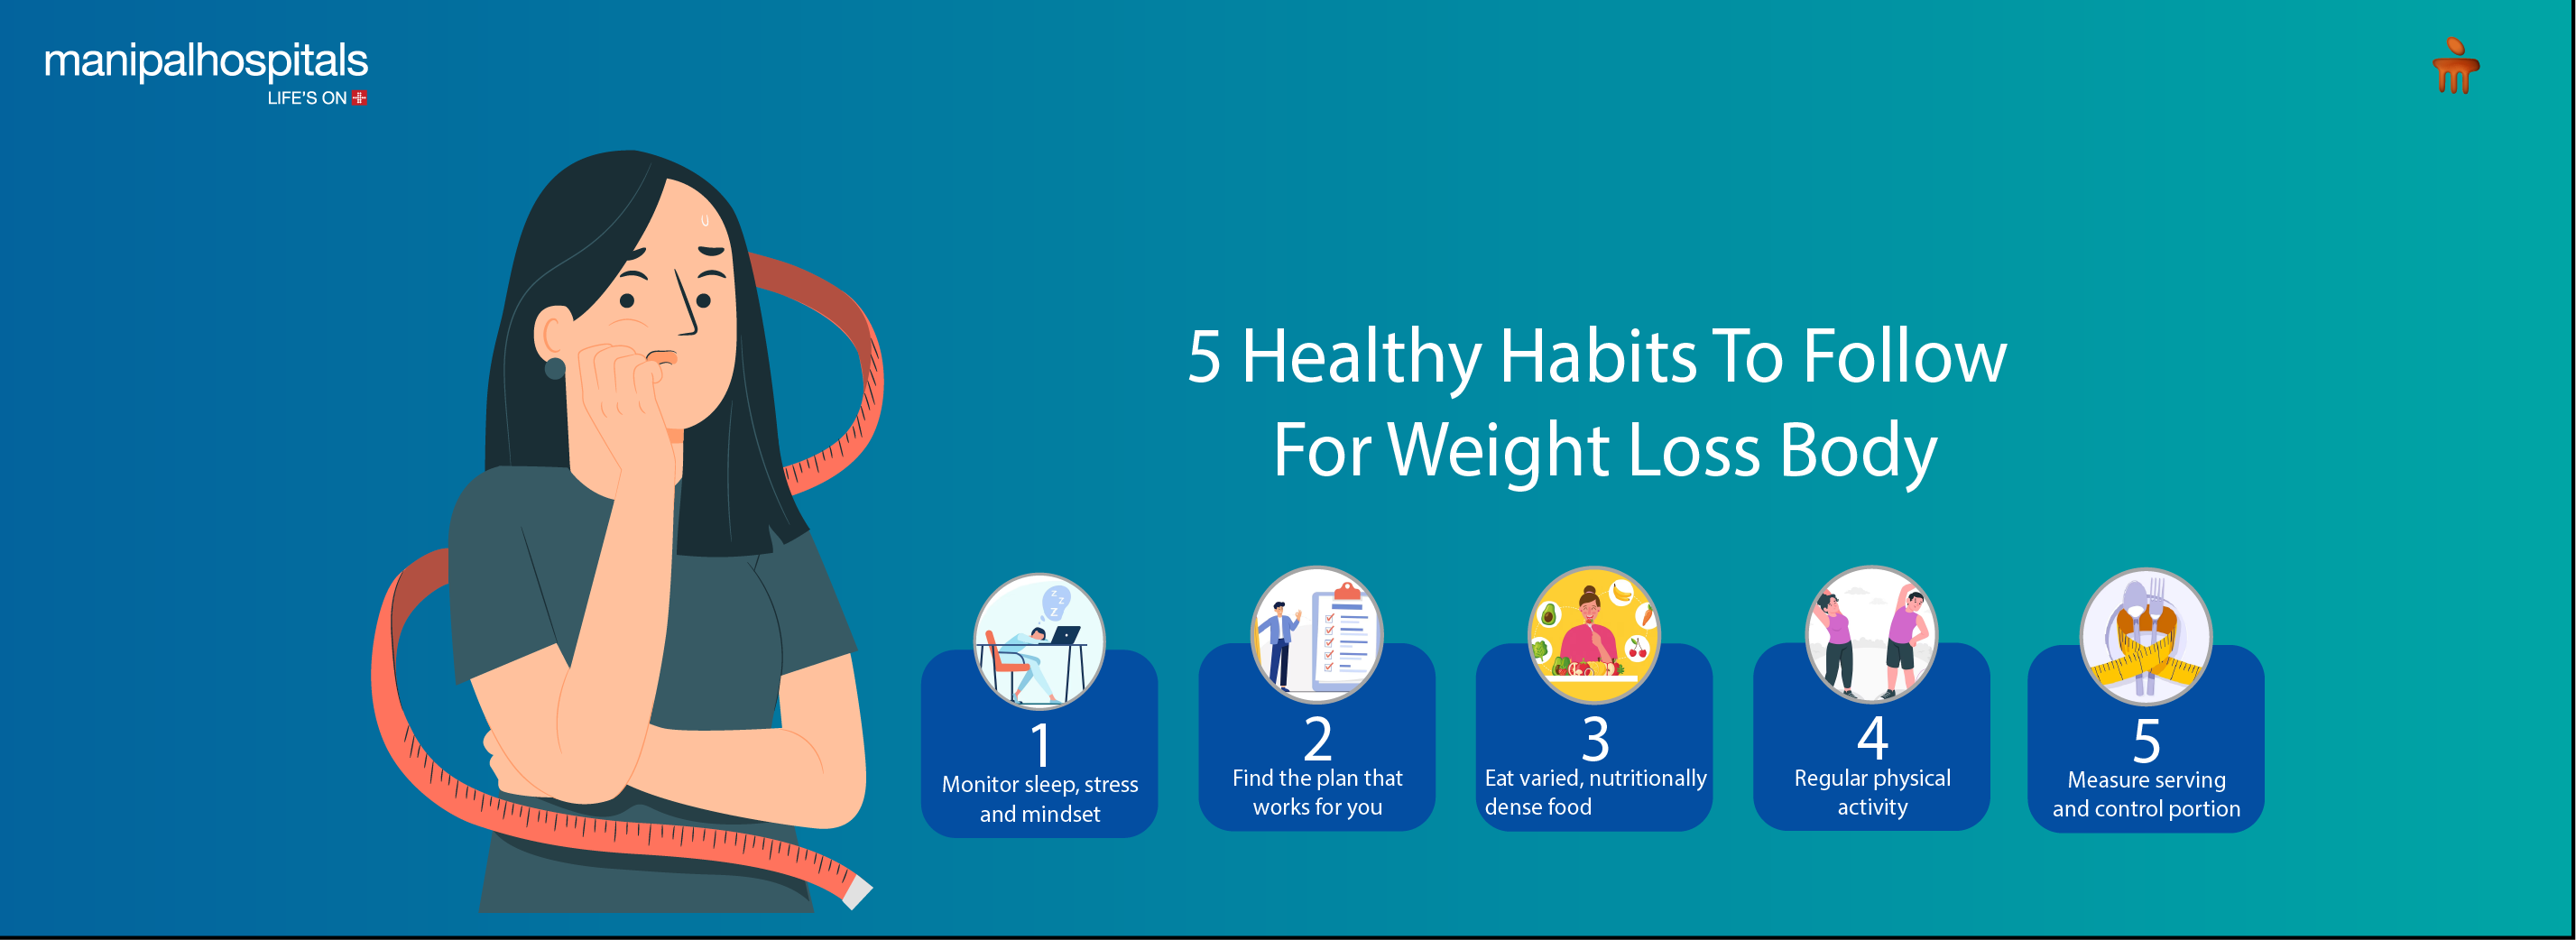 https://www.manipalhospitals.com/uploads/image_gallery/5-healthy-habits-to-follow-for-weight-loss.png